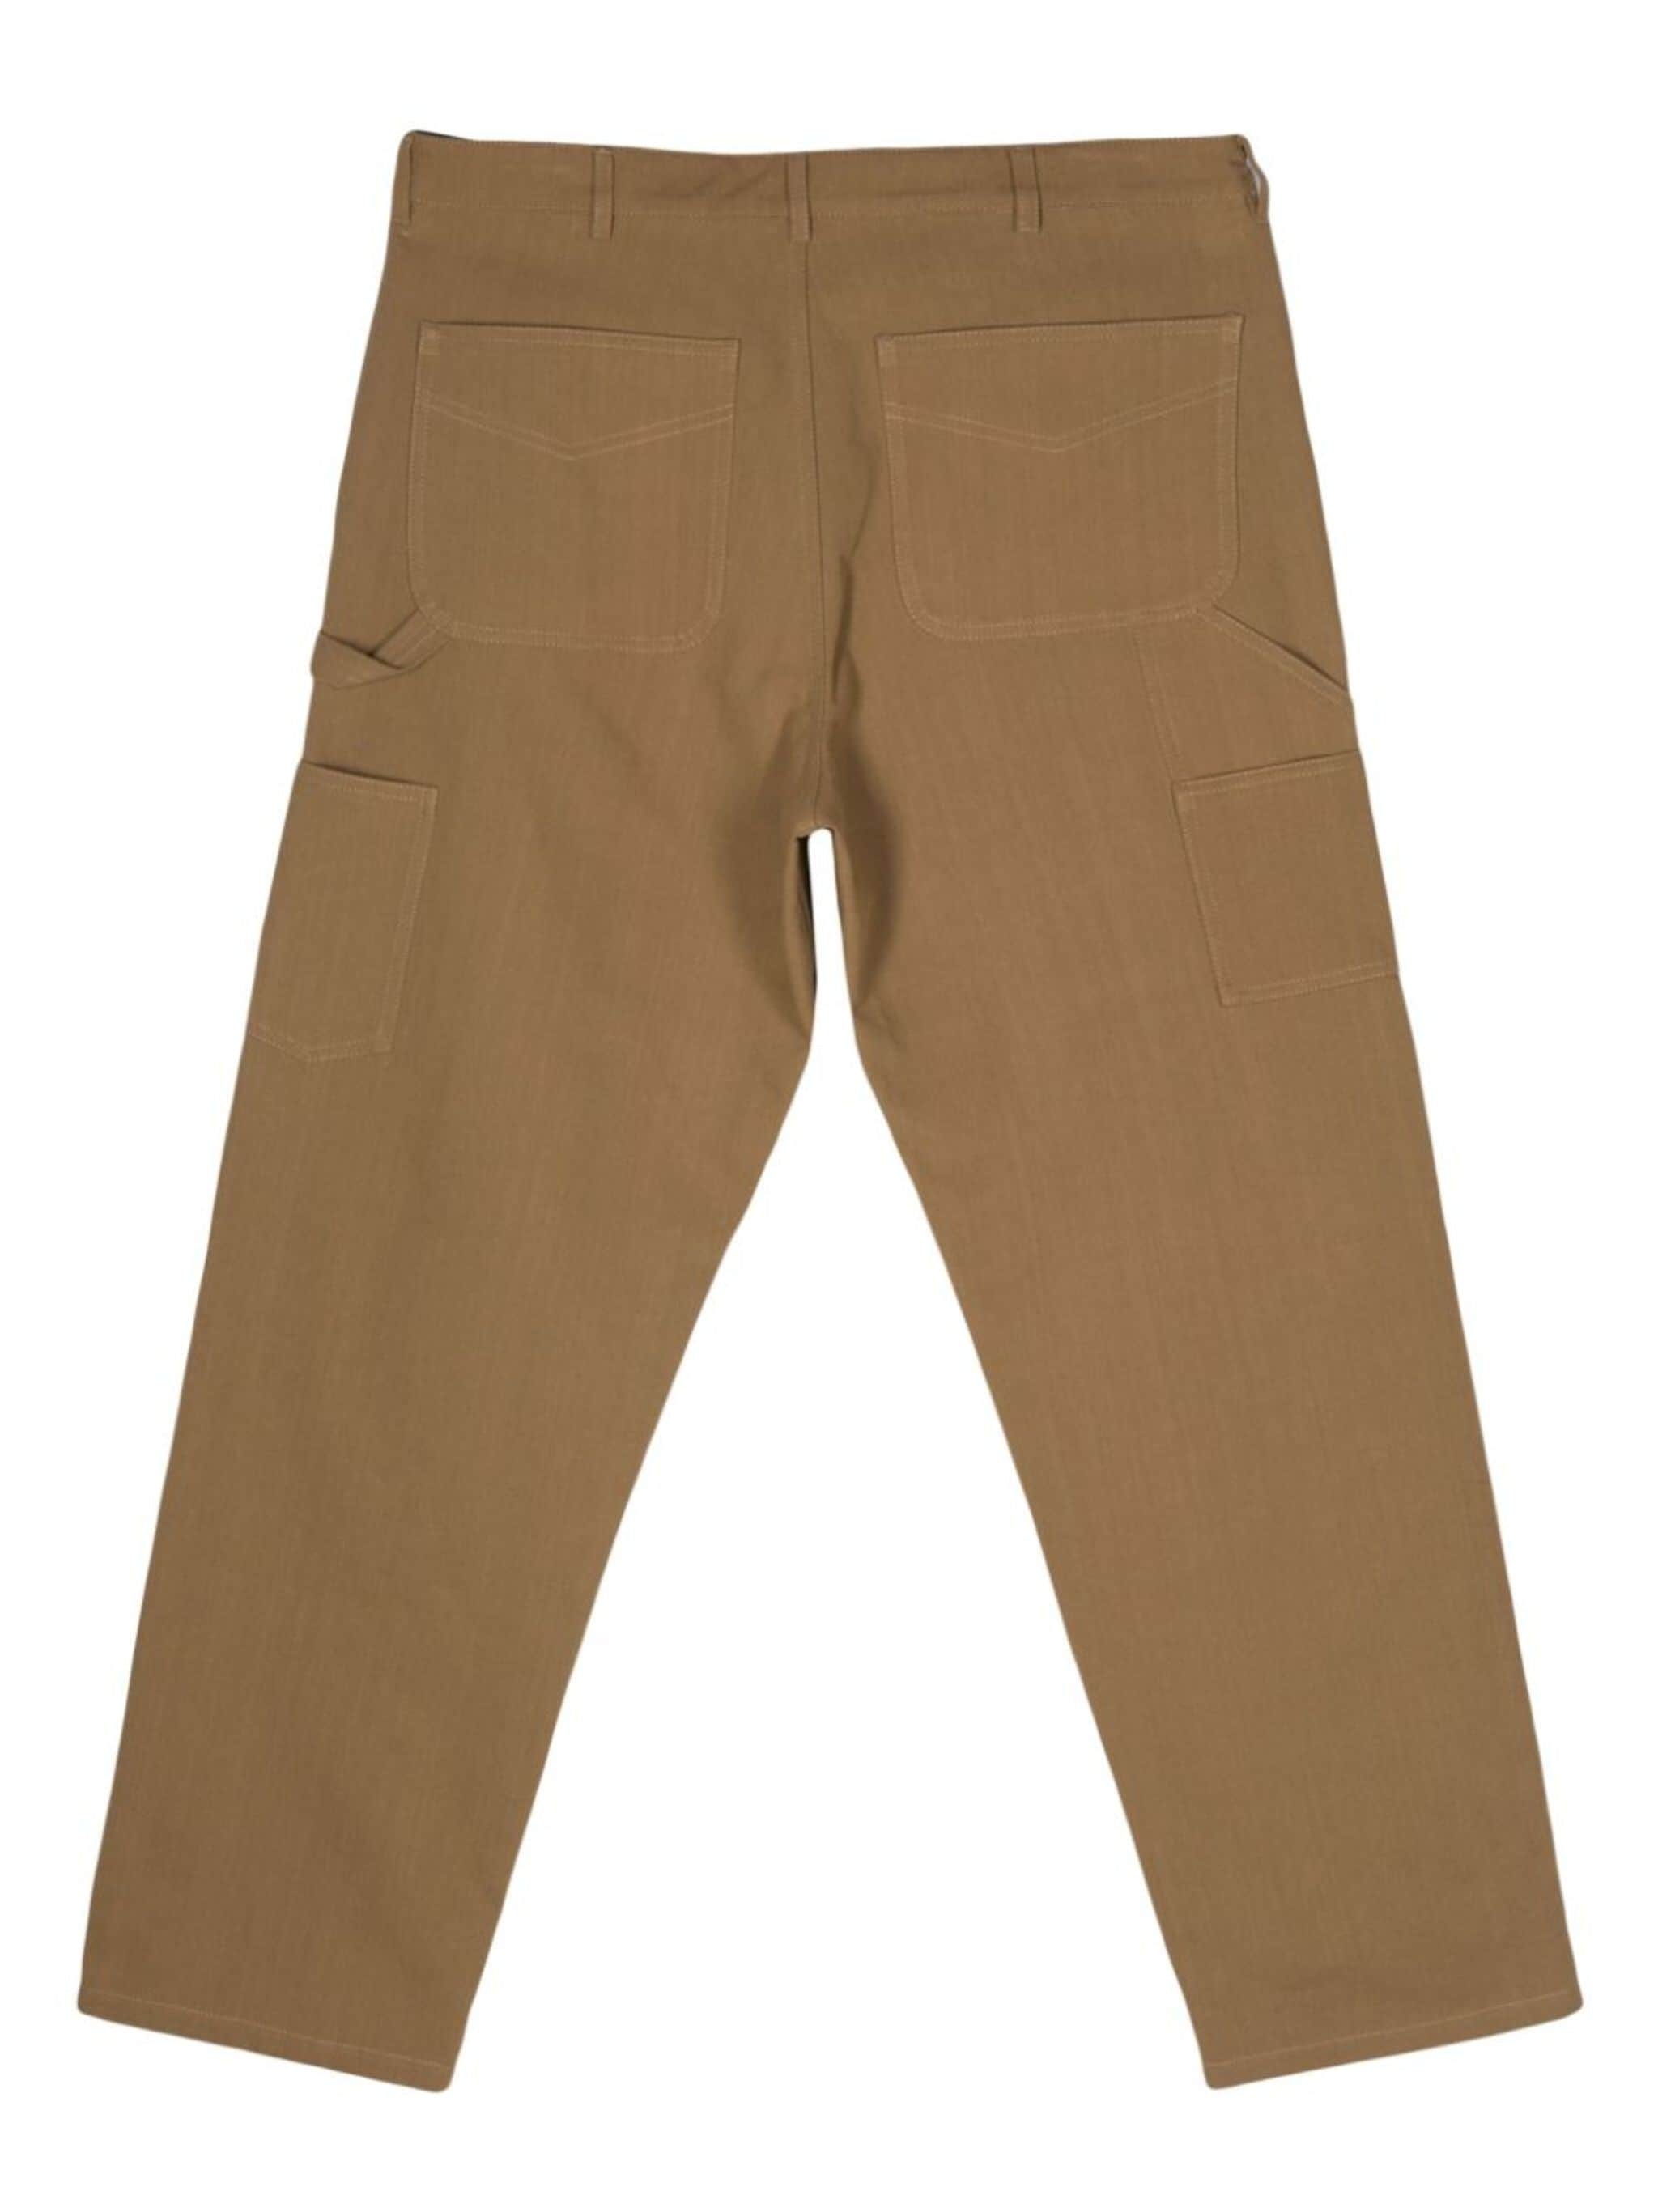 x Roc Nation by Jay Z trousers - 2